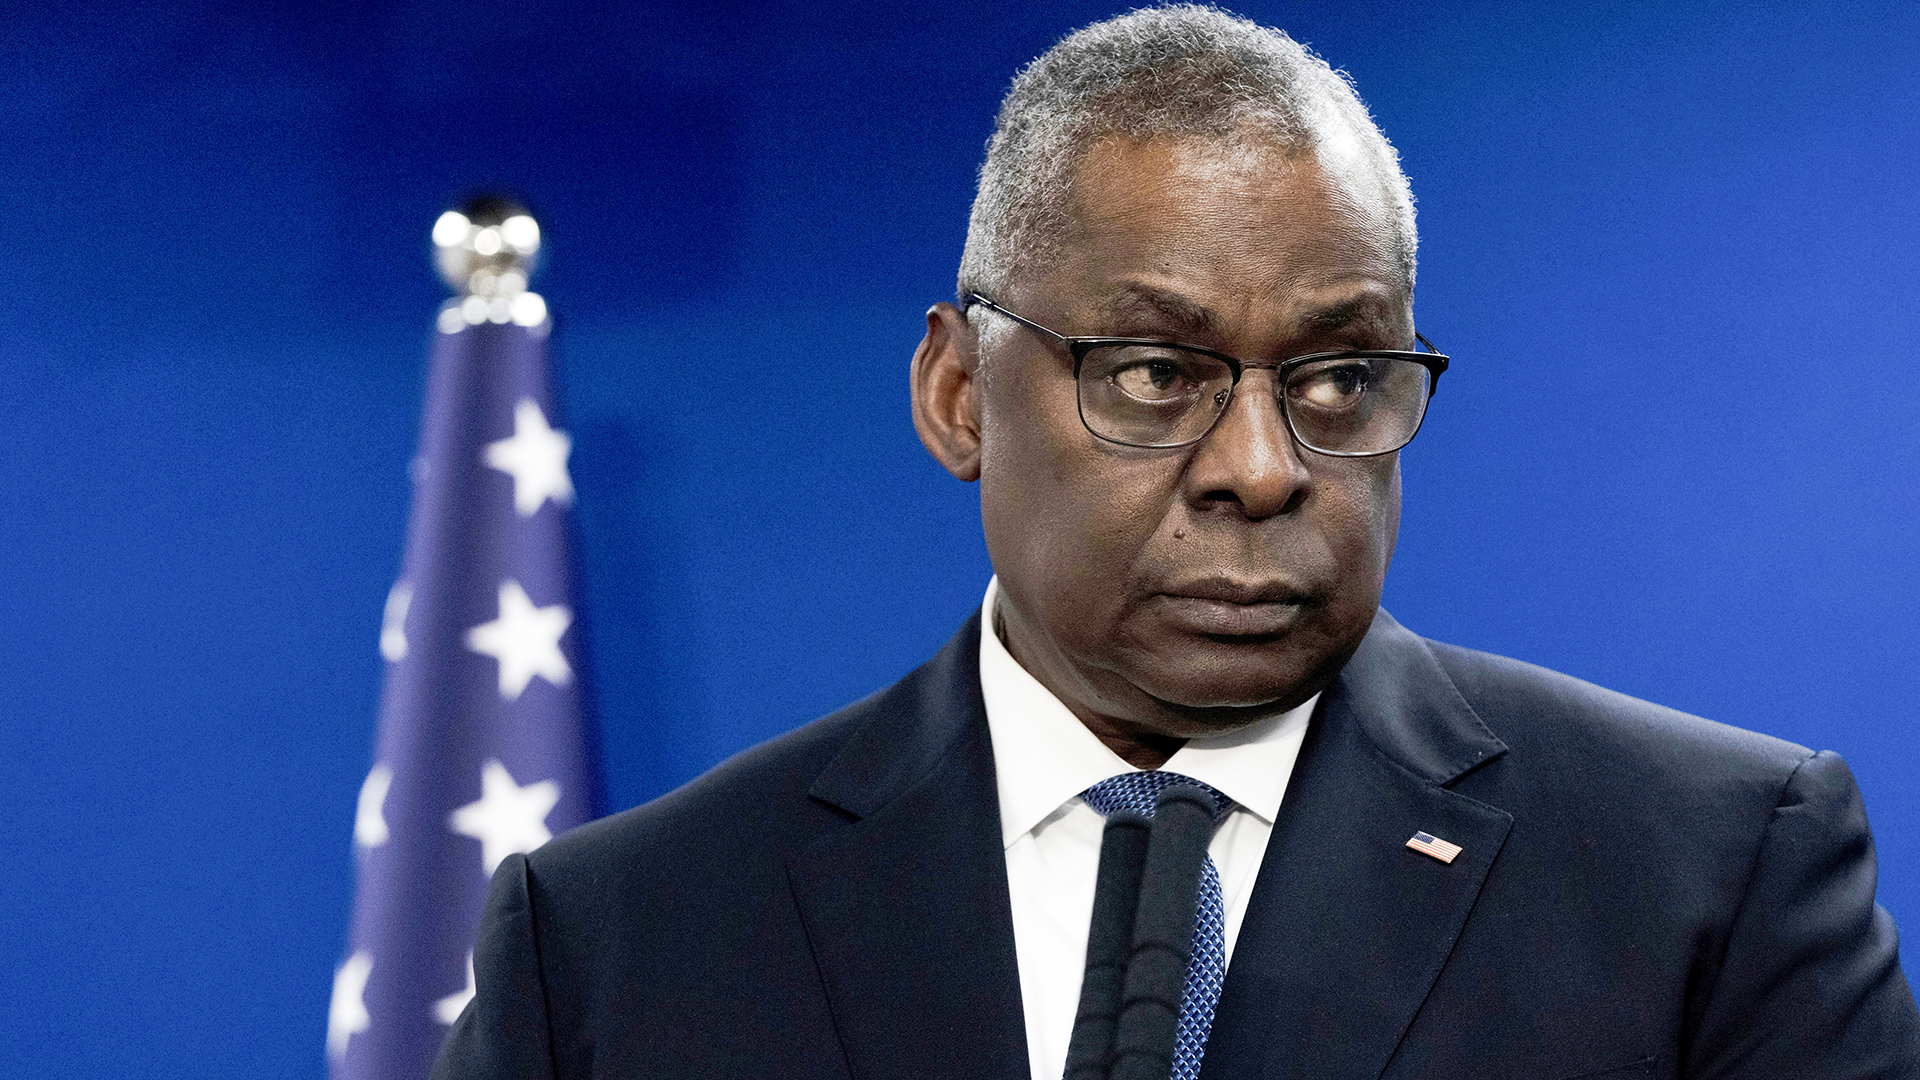 There are several reviews underway about the notification process surrounding Defense Secretary Lloyd Austin's hospitalization and transfer of authority.